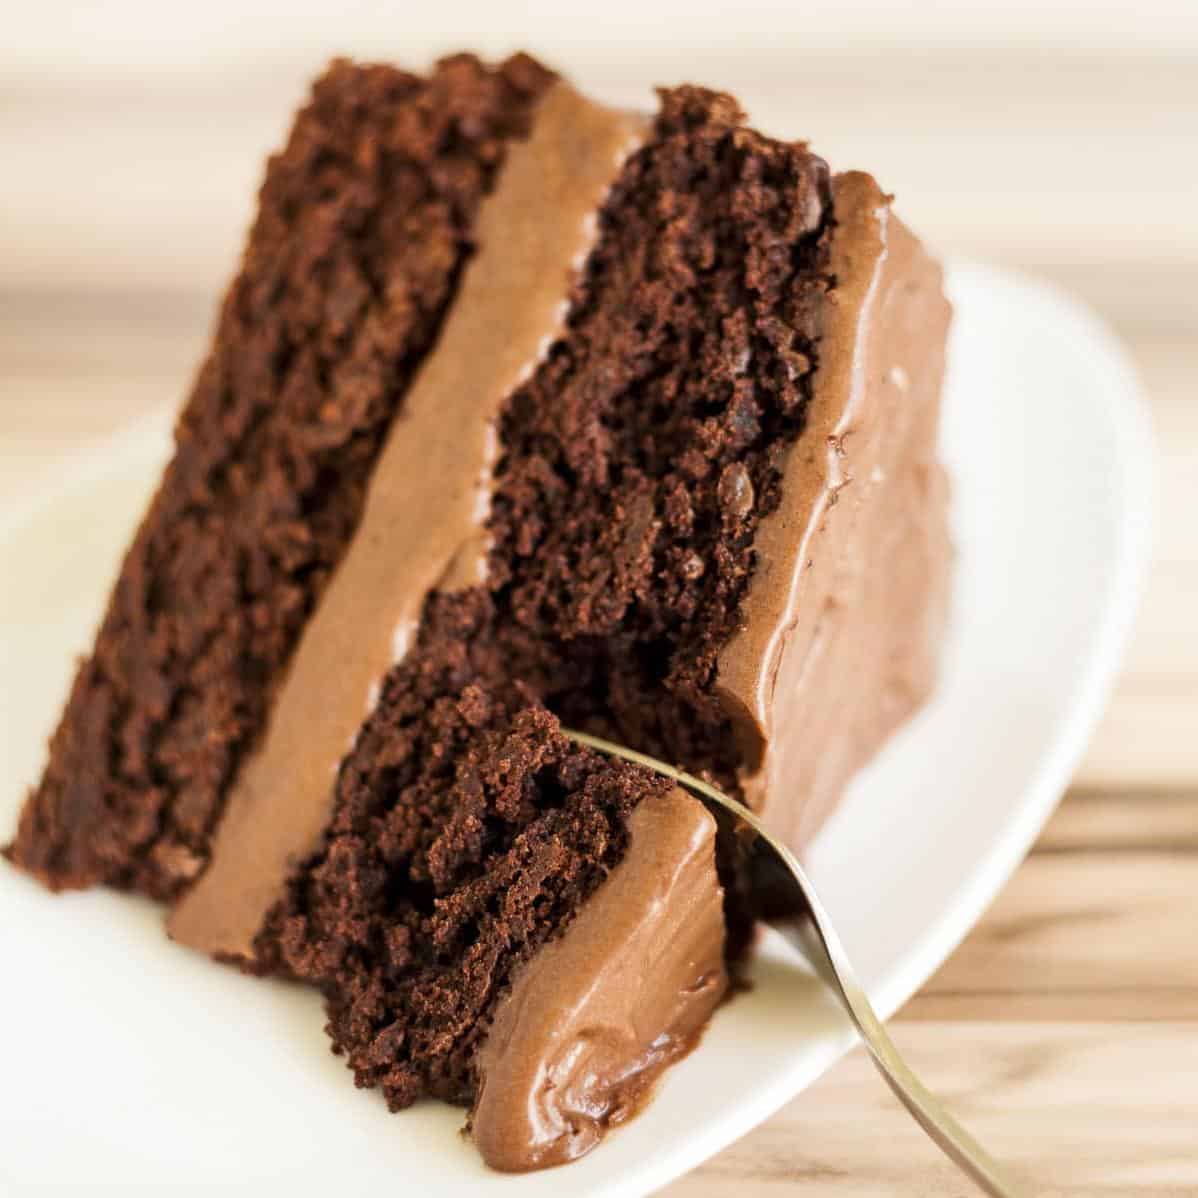  Who says you can't have your cake and eat it too? This chocolate cake won't make you feel guilty for indulging!